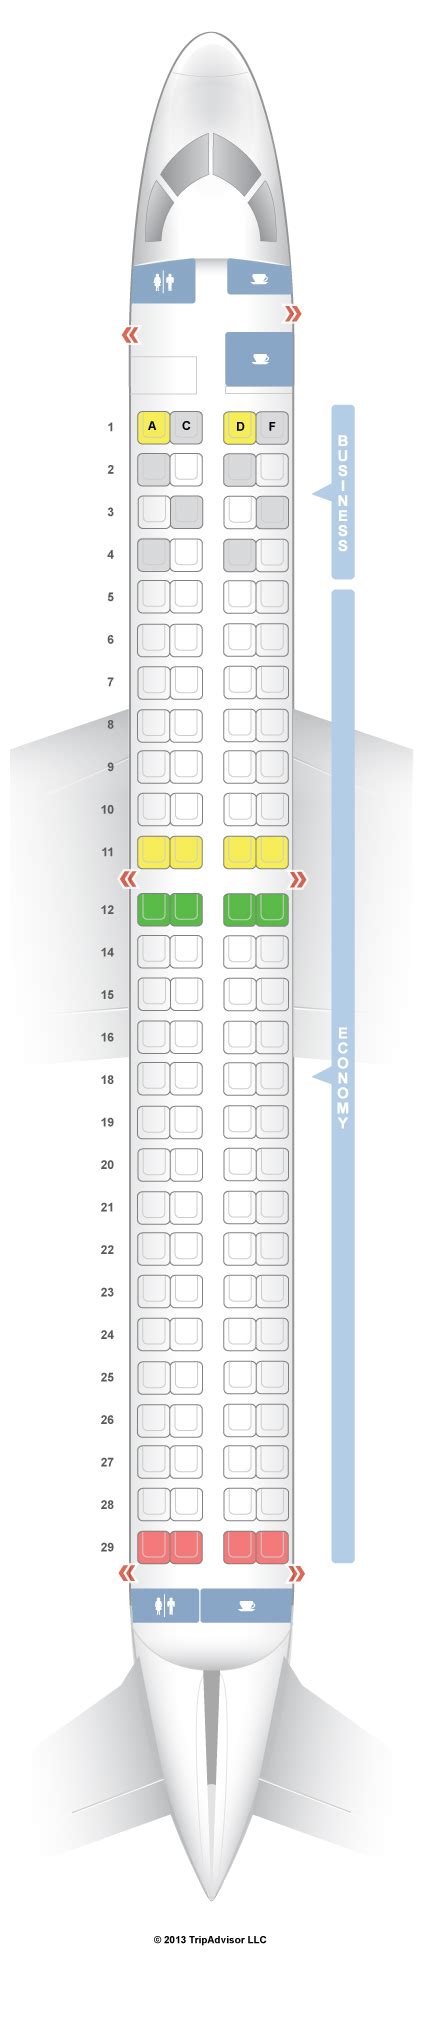 Embraer 190 Seat Map